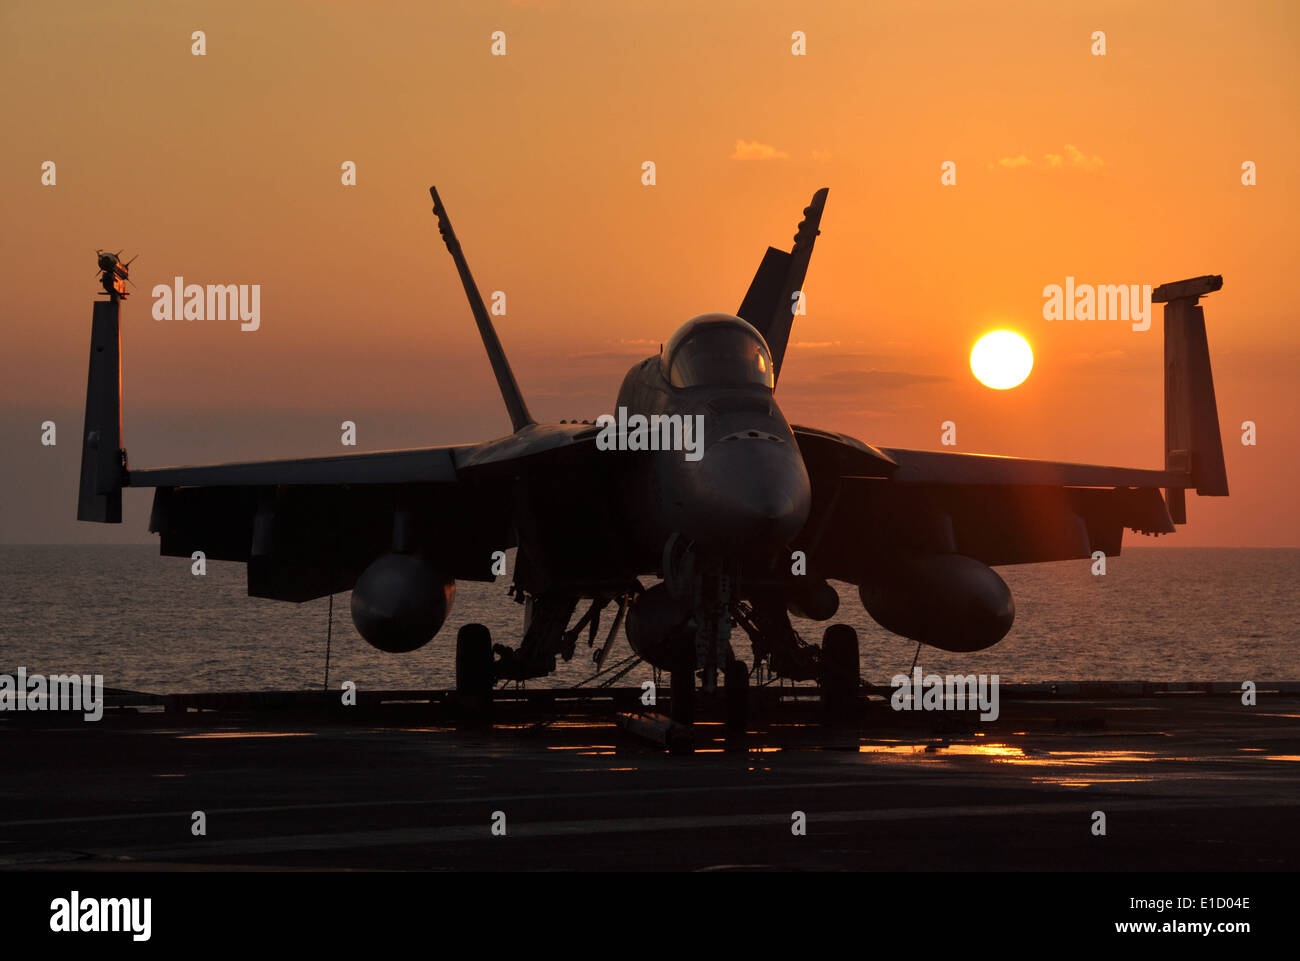 A U.S. Navy F/A-18E Super Hornet aircraft assigned to the ?Tophatters? of Strike Fighter Squadron 14 is shown tied-down on the Stock Photo